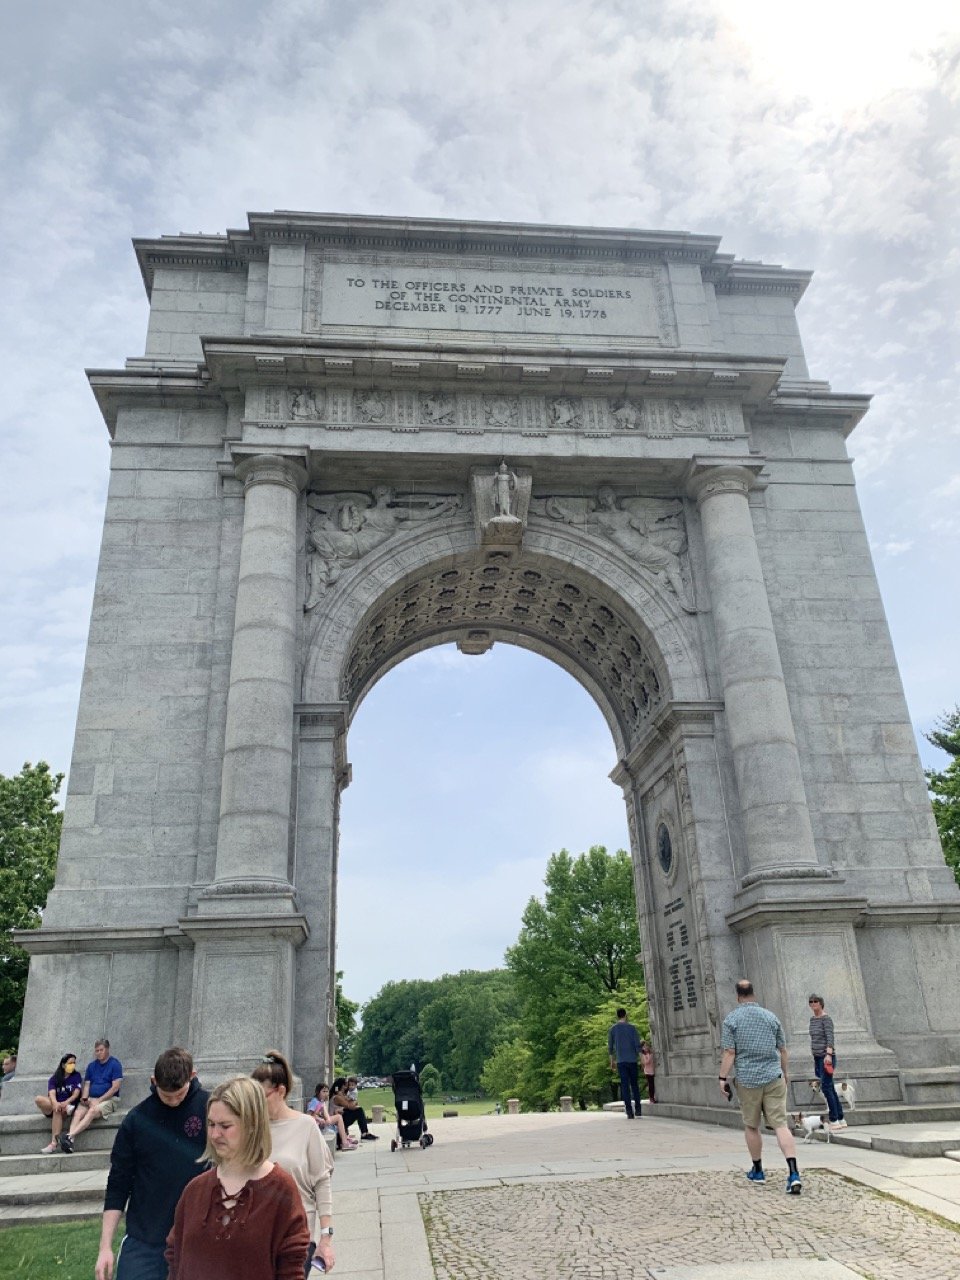 National Memorial Arch completed in 1917